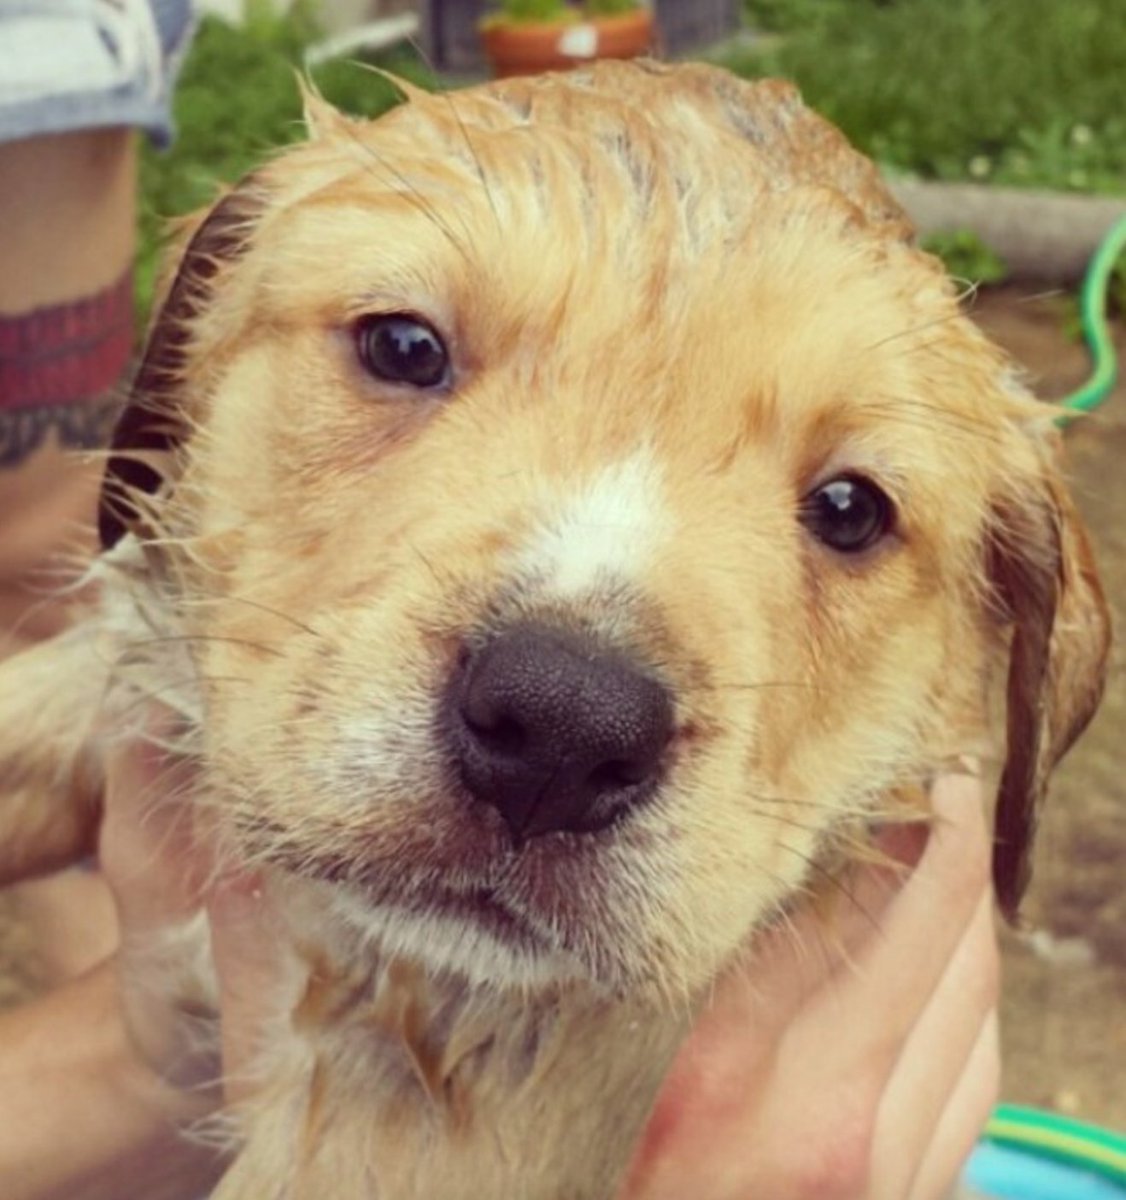 If you're giving your dog a bath this weekend, film 'em. Reason why: https://t.co/qoeaPP5te4 https://t.co/xKkEuLqUXQ